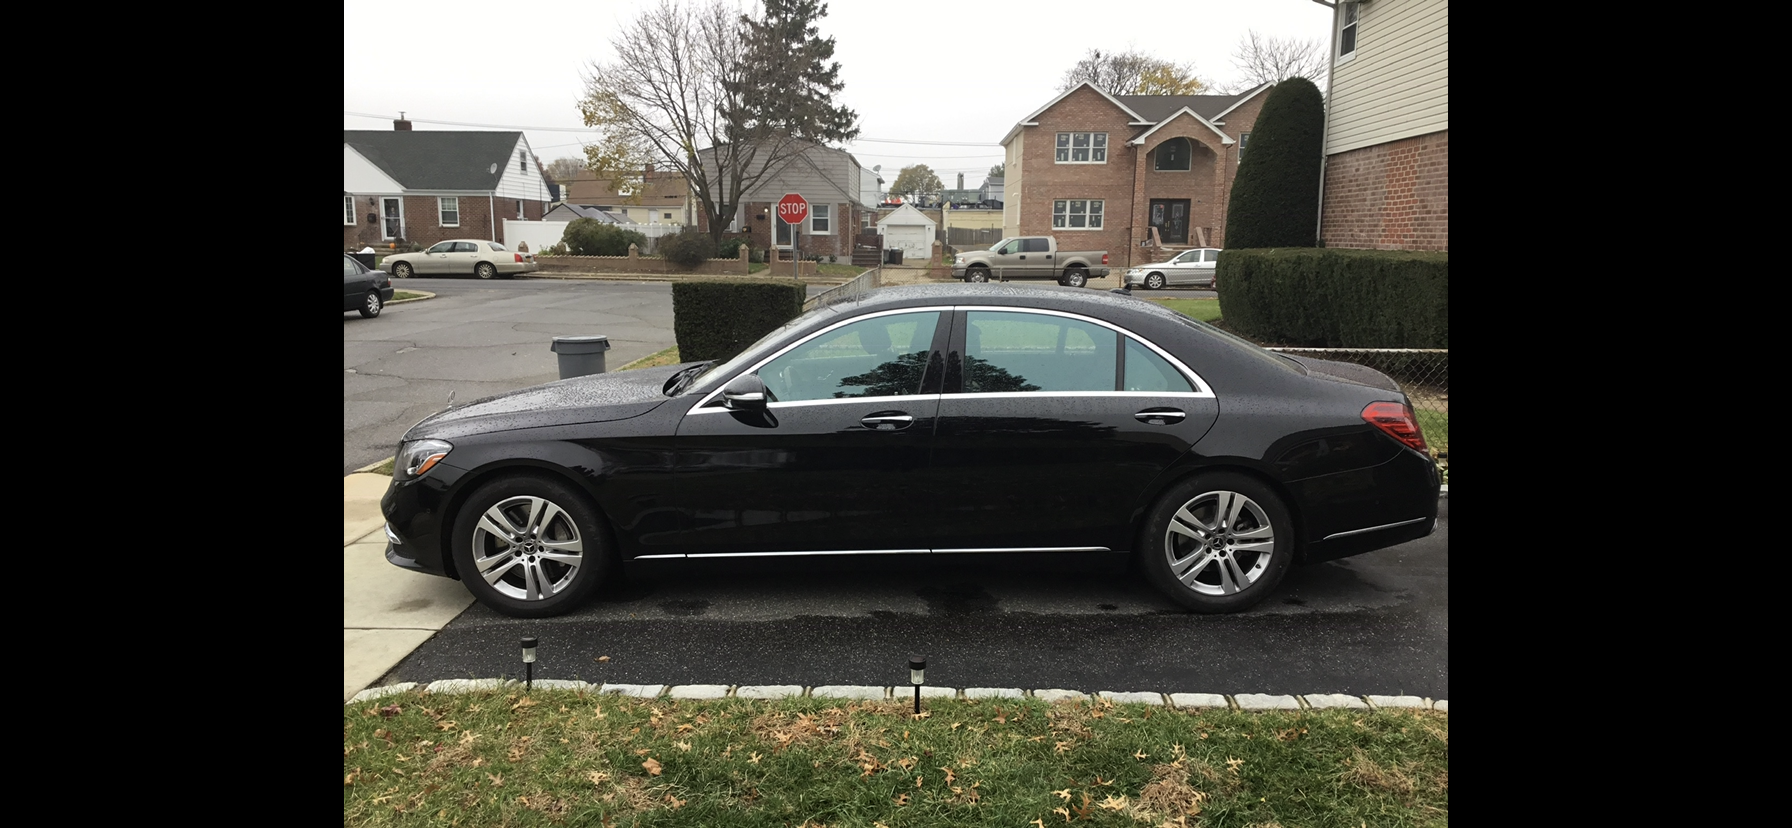 MERCEDES S550
Sedan /
Teterboro, NJ

 / Hourly $0.00
 / Hourly (Other services) $85.00
 / Airport Transfer $175.00
